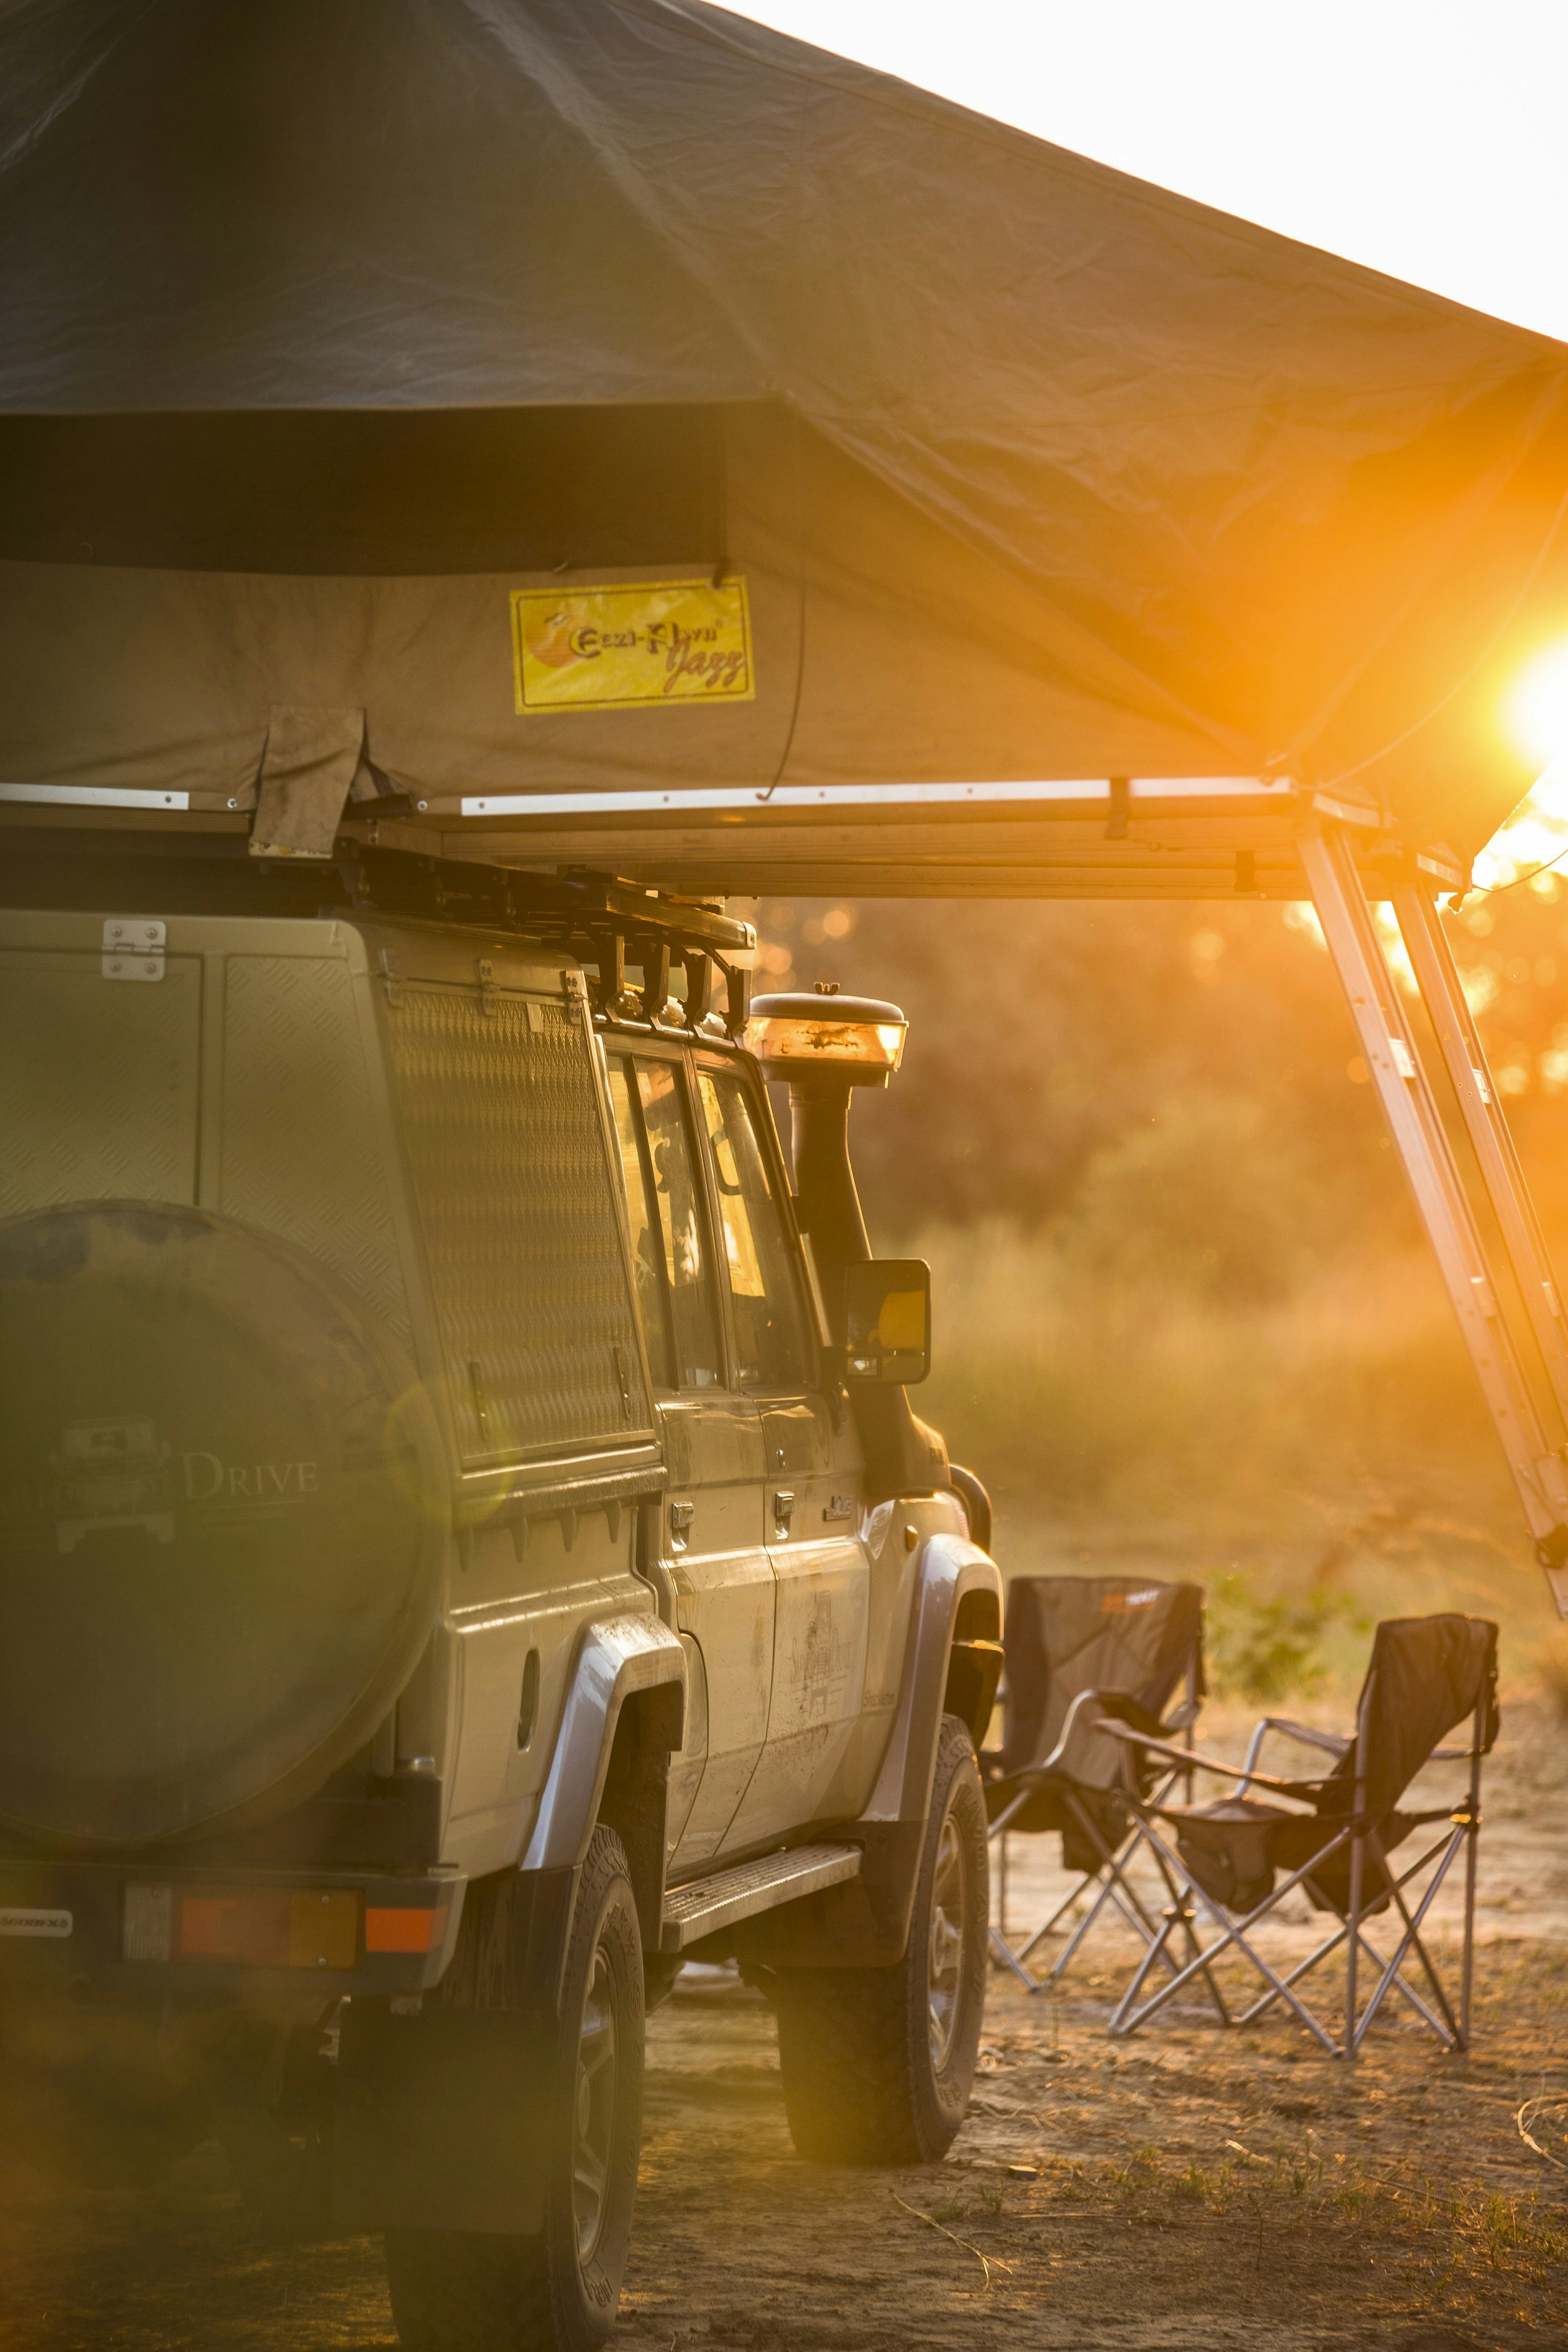 A self-drive 4WD vehicle is parked in a campsite, with folding chairs in front and a tent on the roof. The sun is setting and the light is golden.